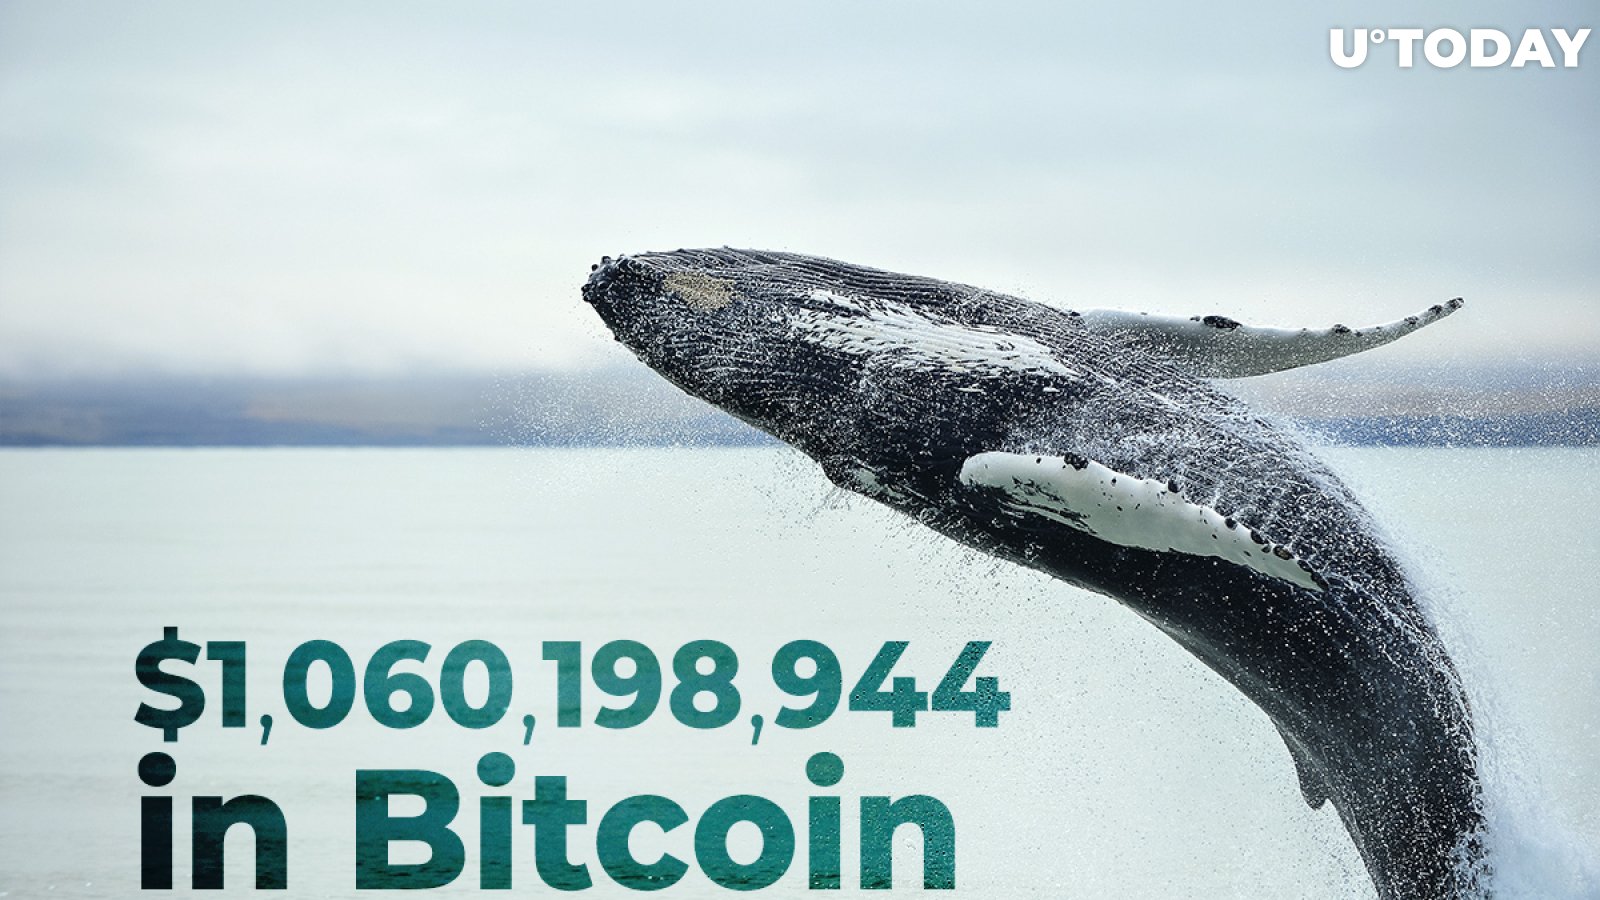 Whales Shift $1,060,198,944 in Bitcoin as BTC Is Back Above $23,000